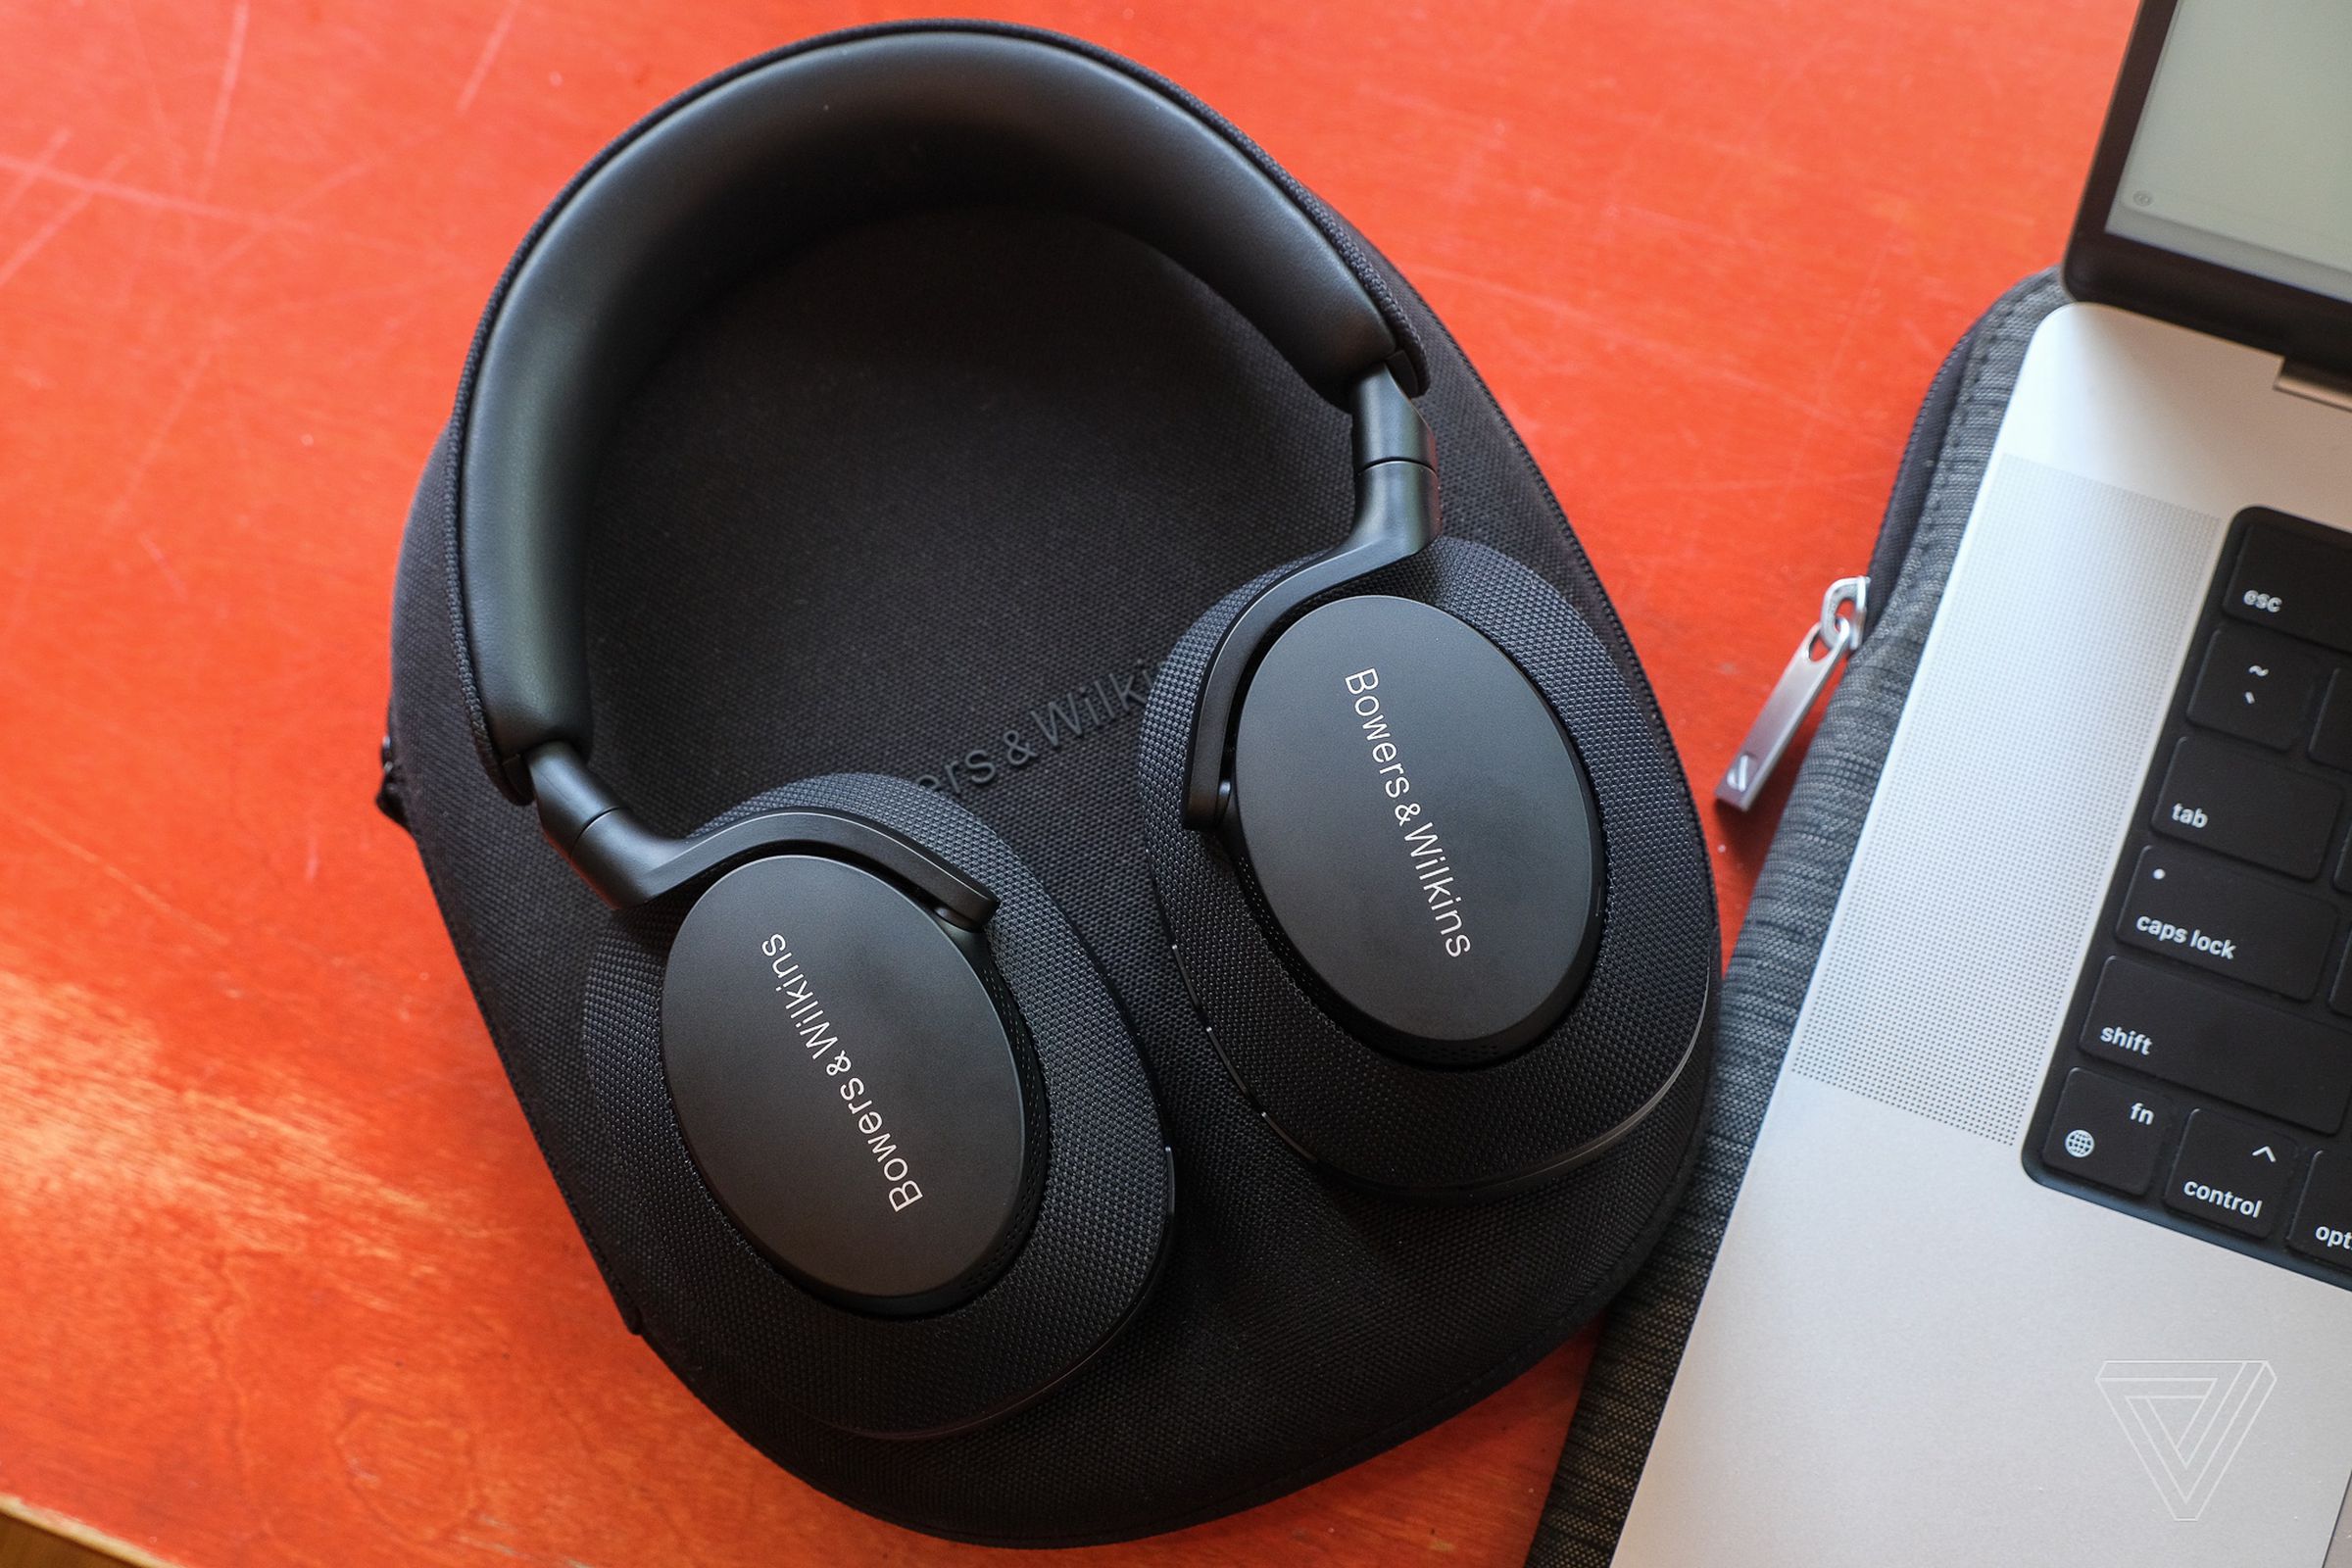 The Bowers & Wilkins PX7 S2 headphones cost $399.